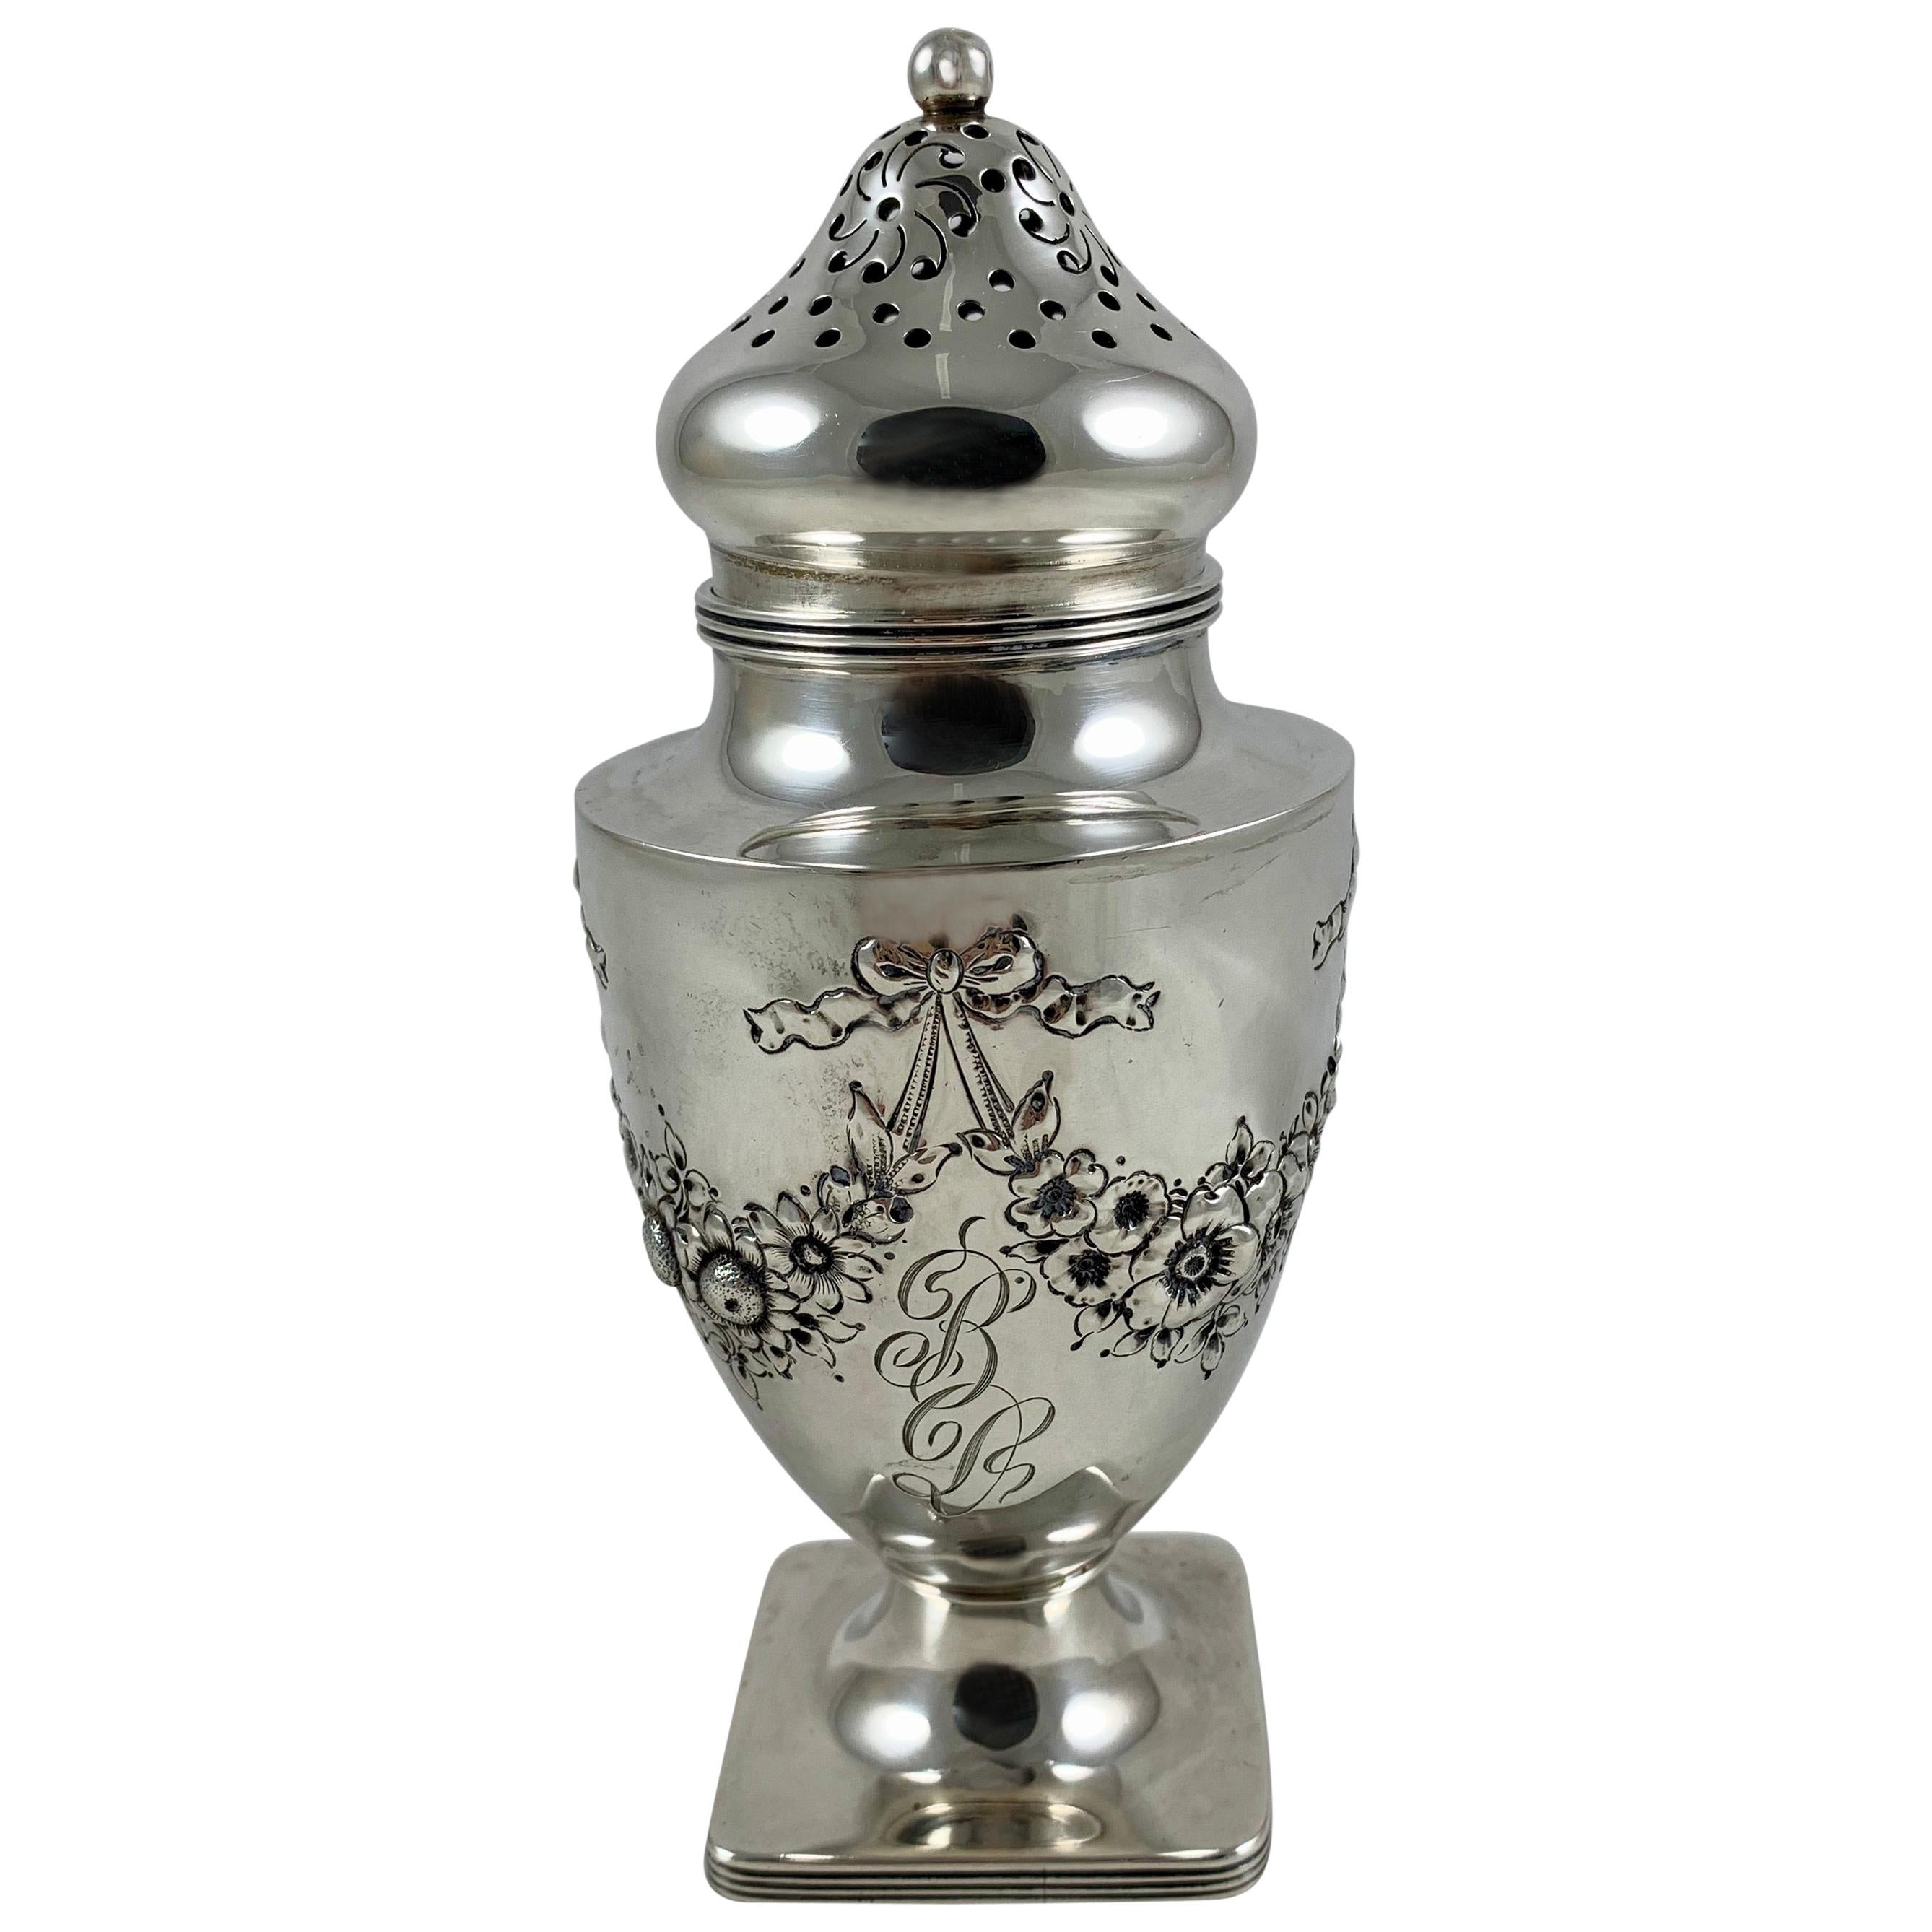 19th Century American Lebkuechar & Co. Sterling Silver Floral & Bow Sugar Caster